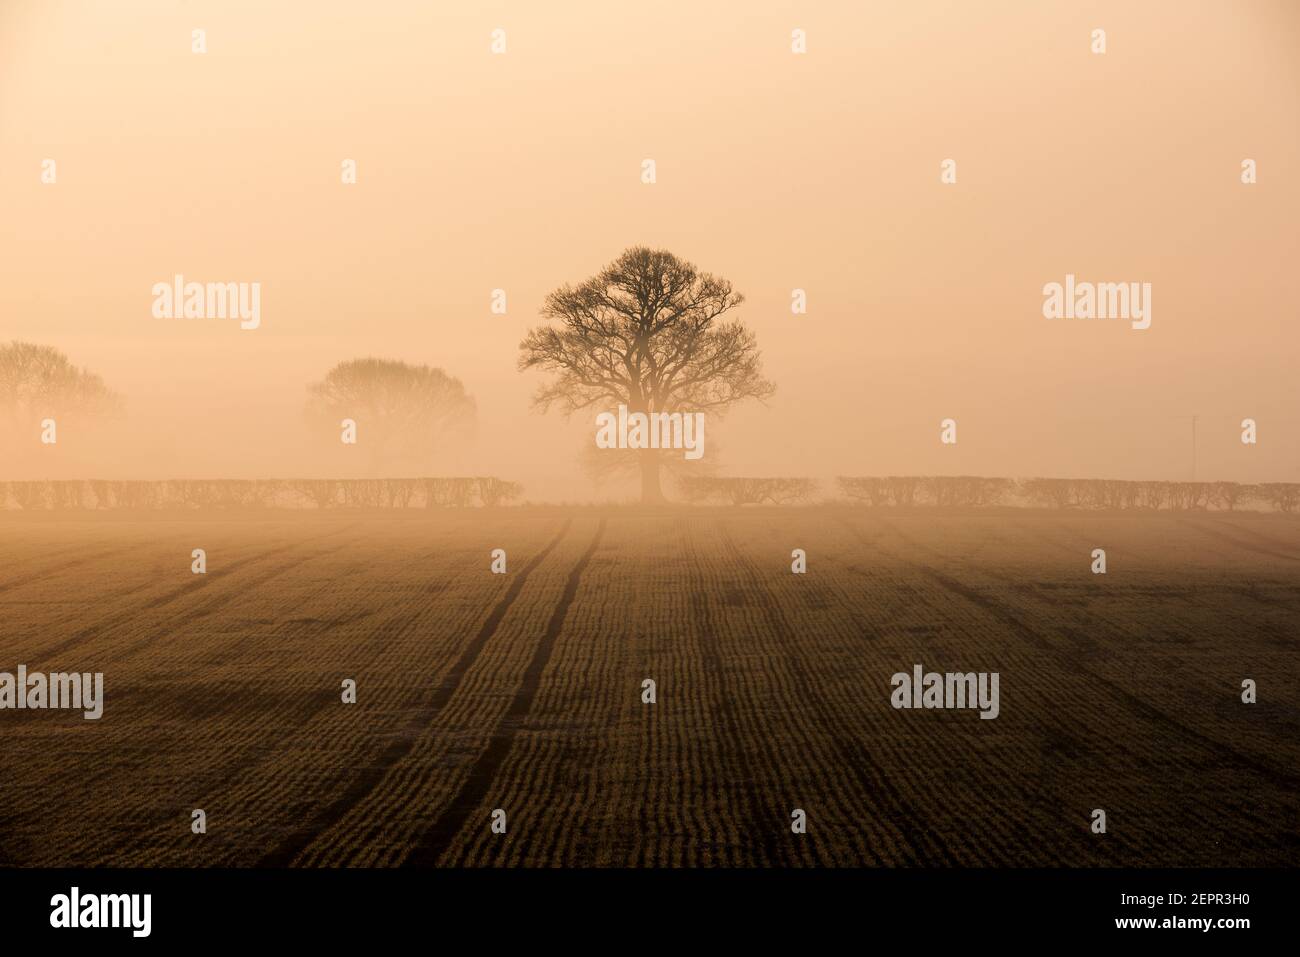 Bingham, Nottinghamshire, UK. 28th Feb 2021. A tree emerges from a layer of fog as the sun rises over Bingham, Nottinghamshire. Neil Squires/Alamy Live News Stock Photo